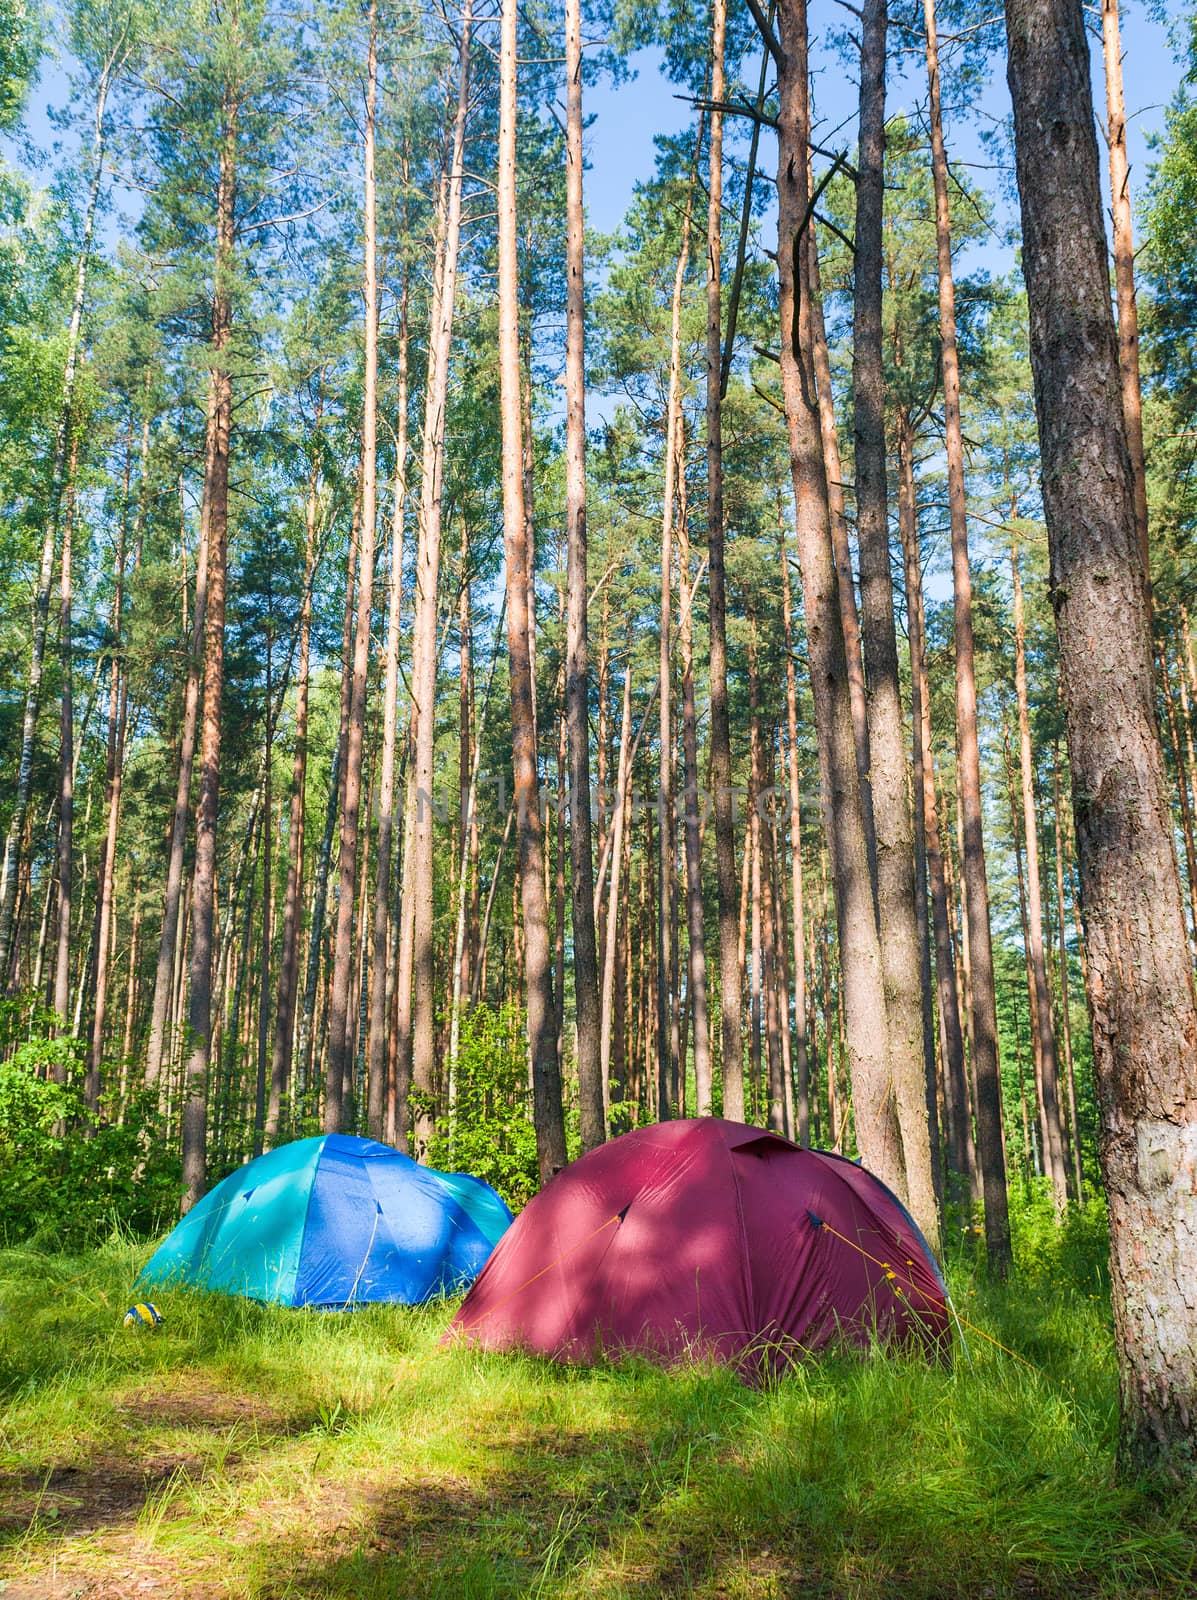 In the tourist camp in the forest